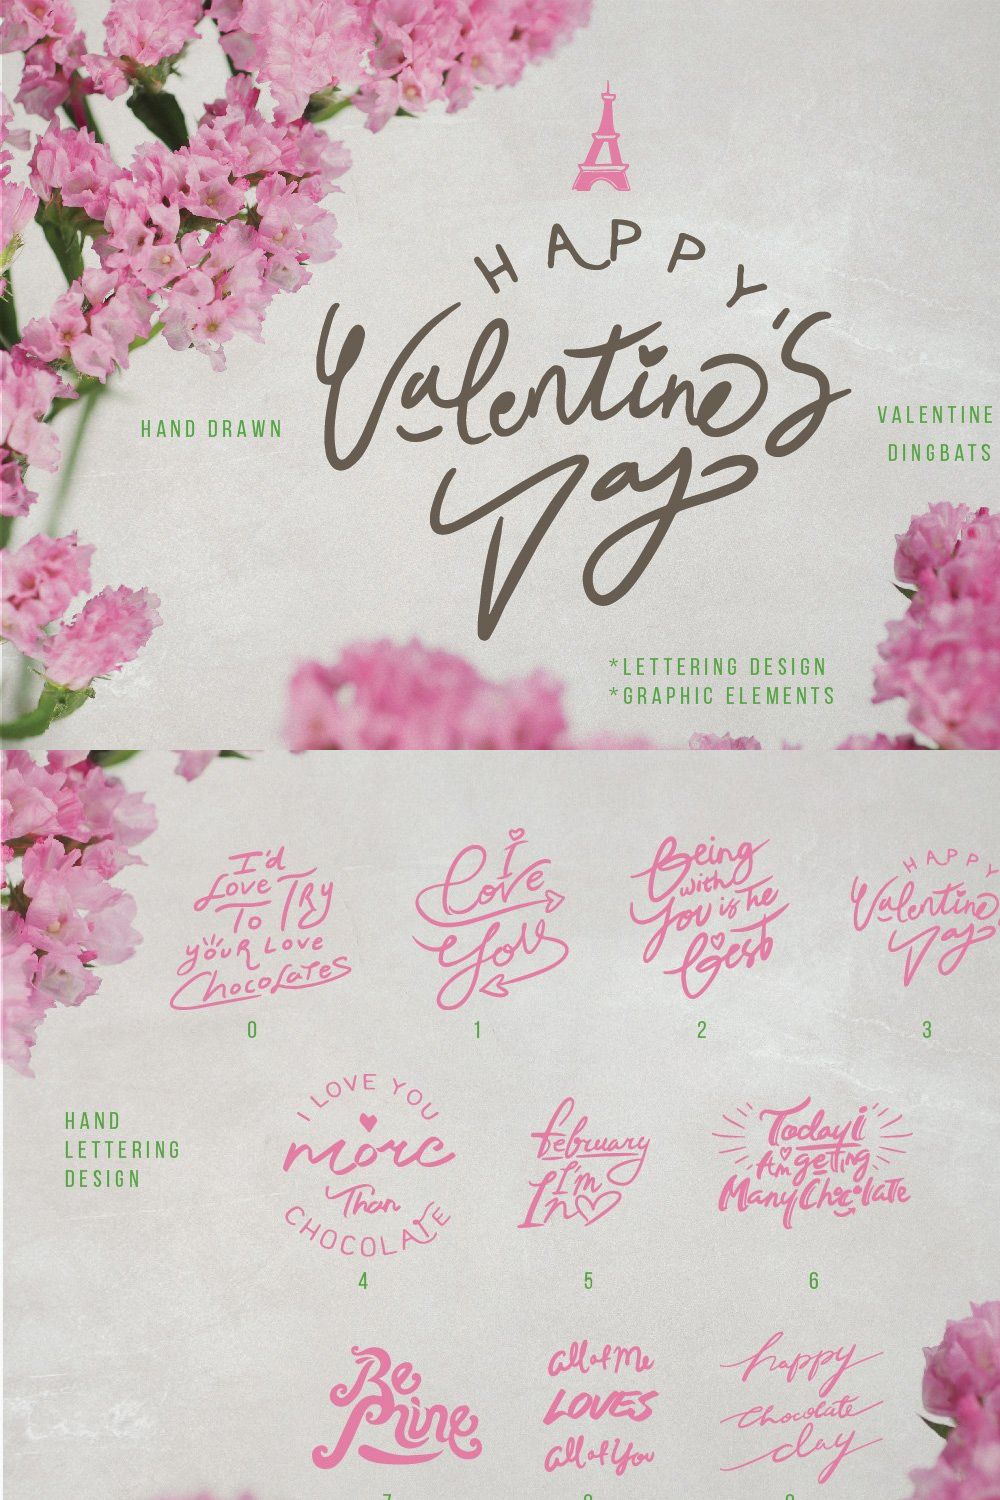 Happy Valentine's Day pinterest preview image.